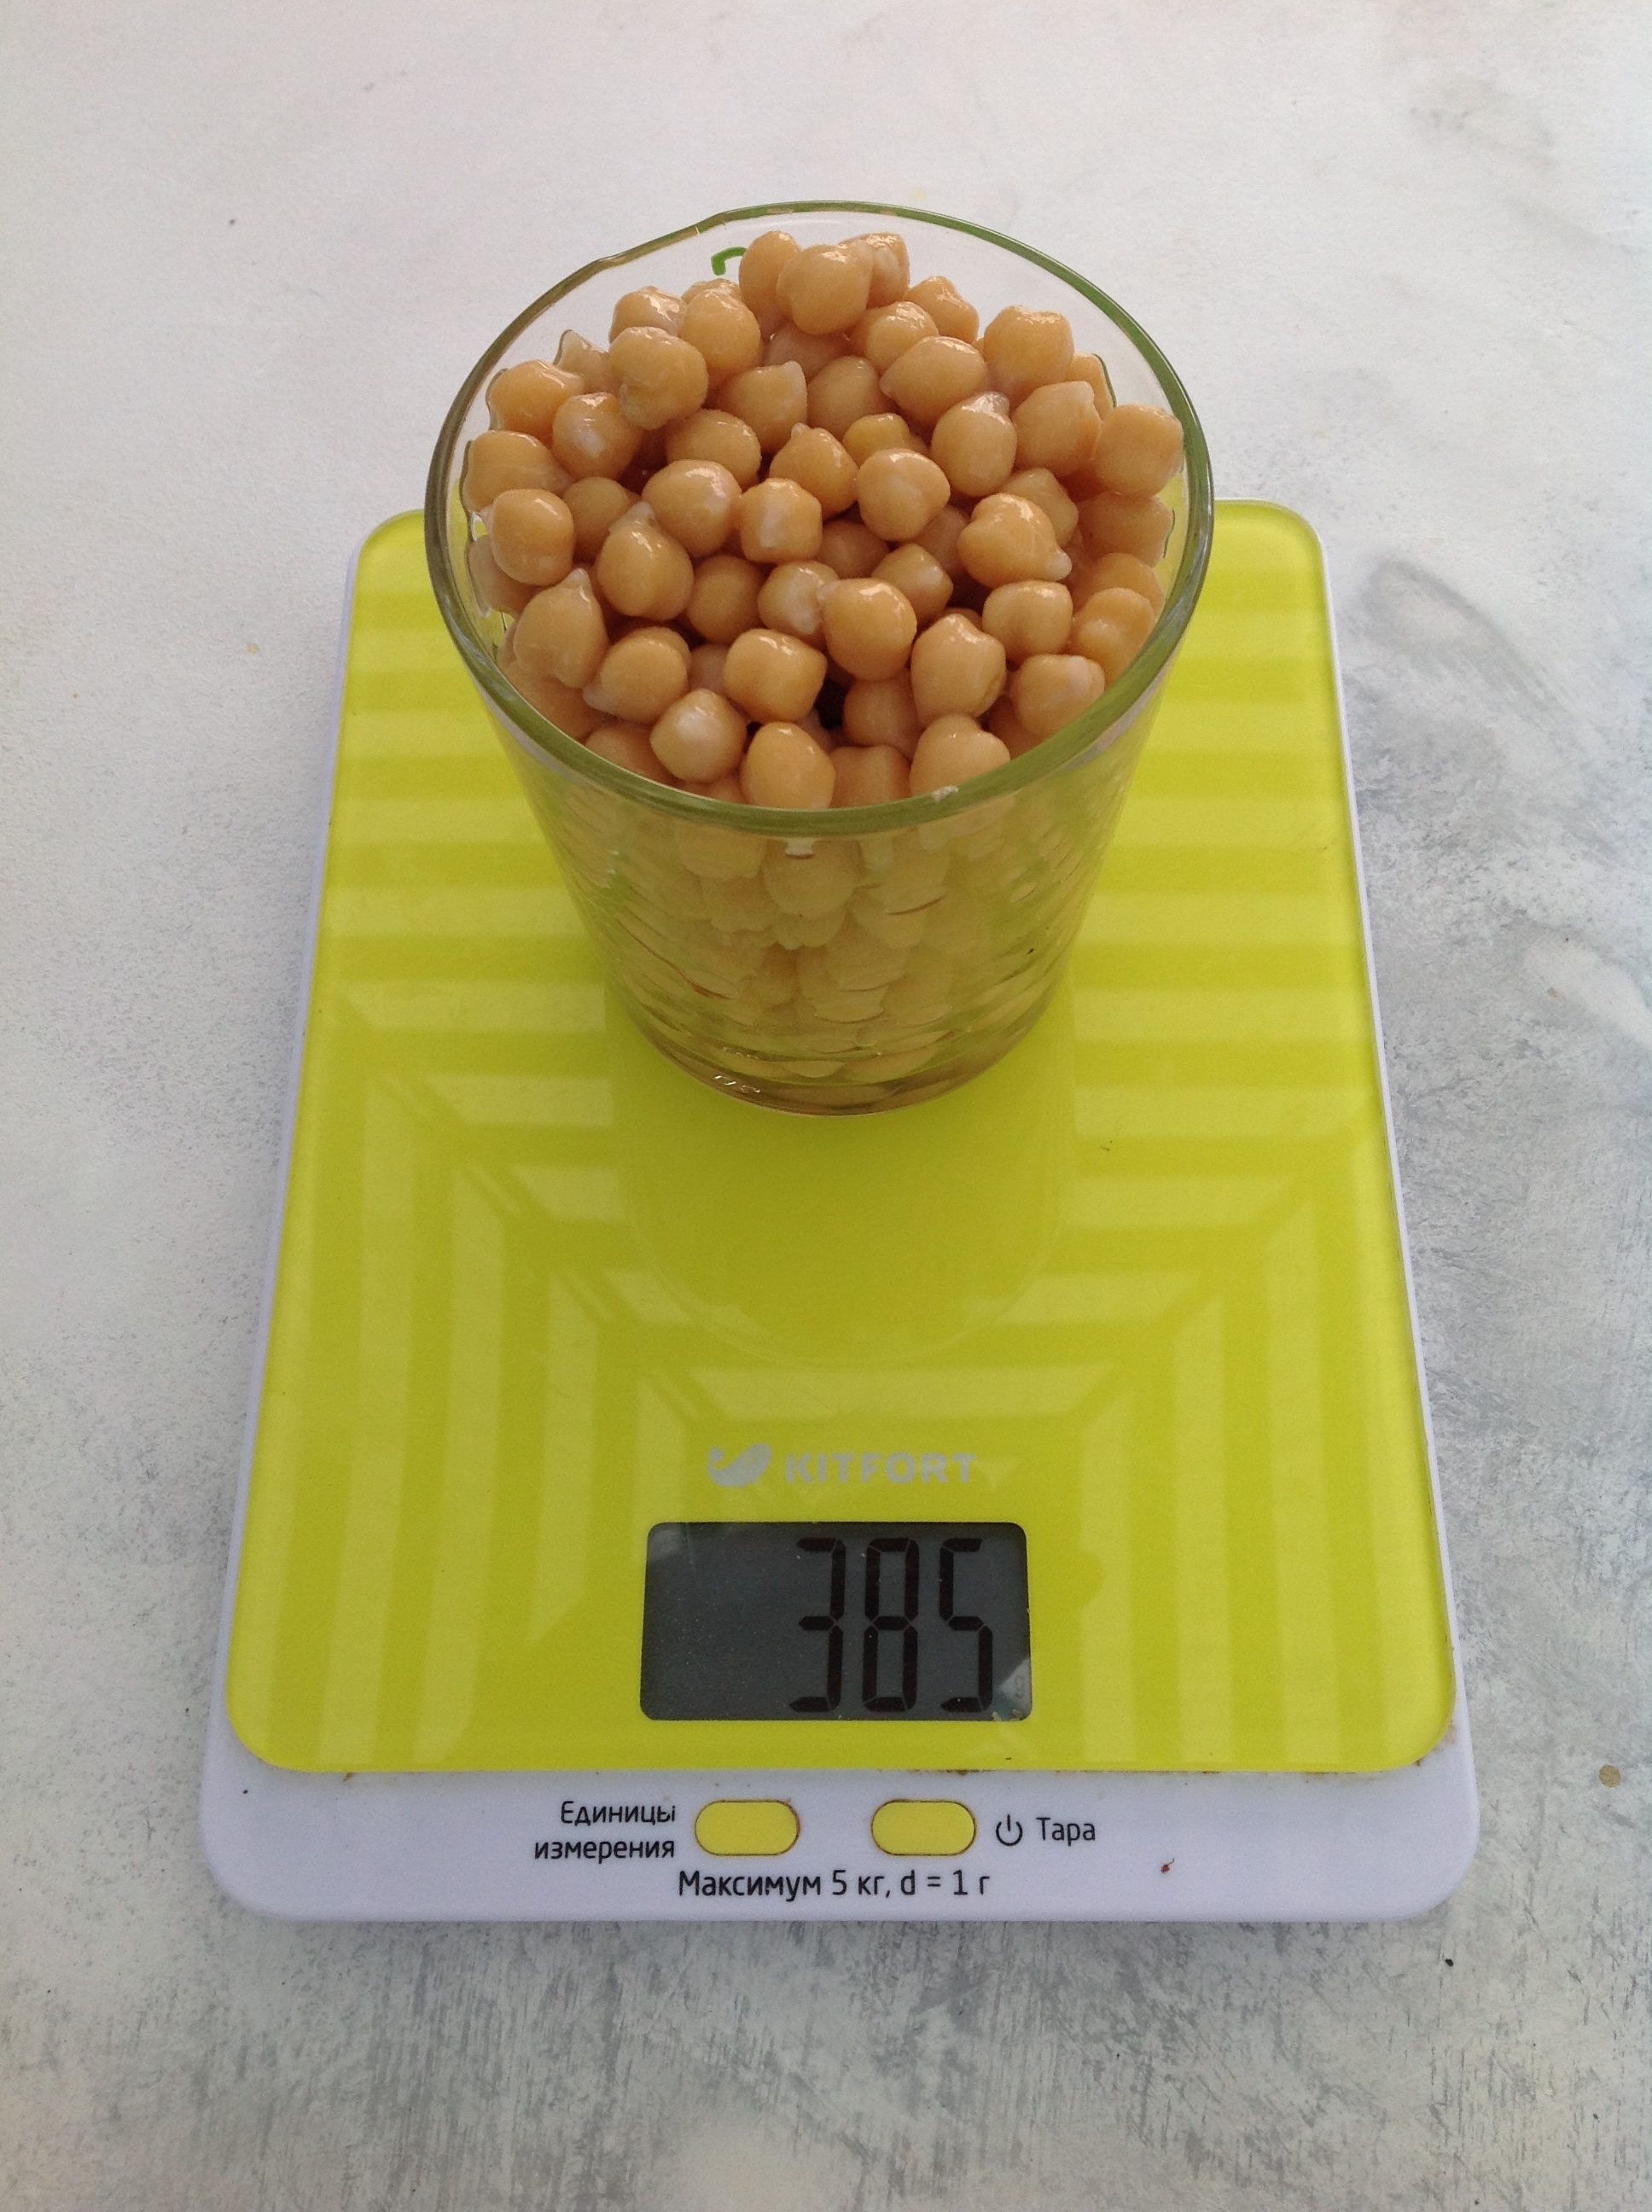 weight of a glass of boiled chickpeas